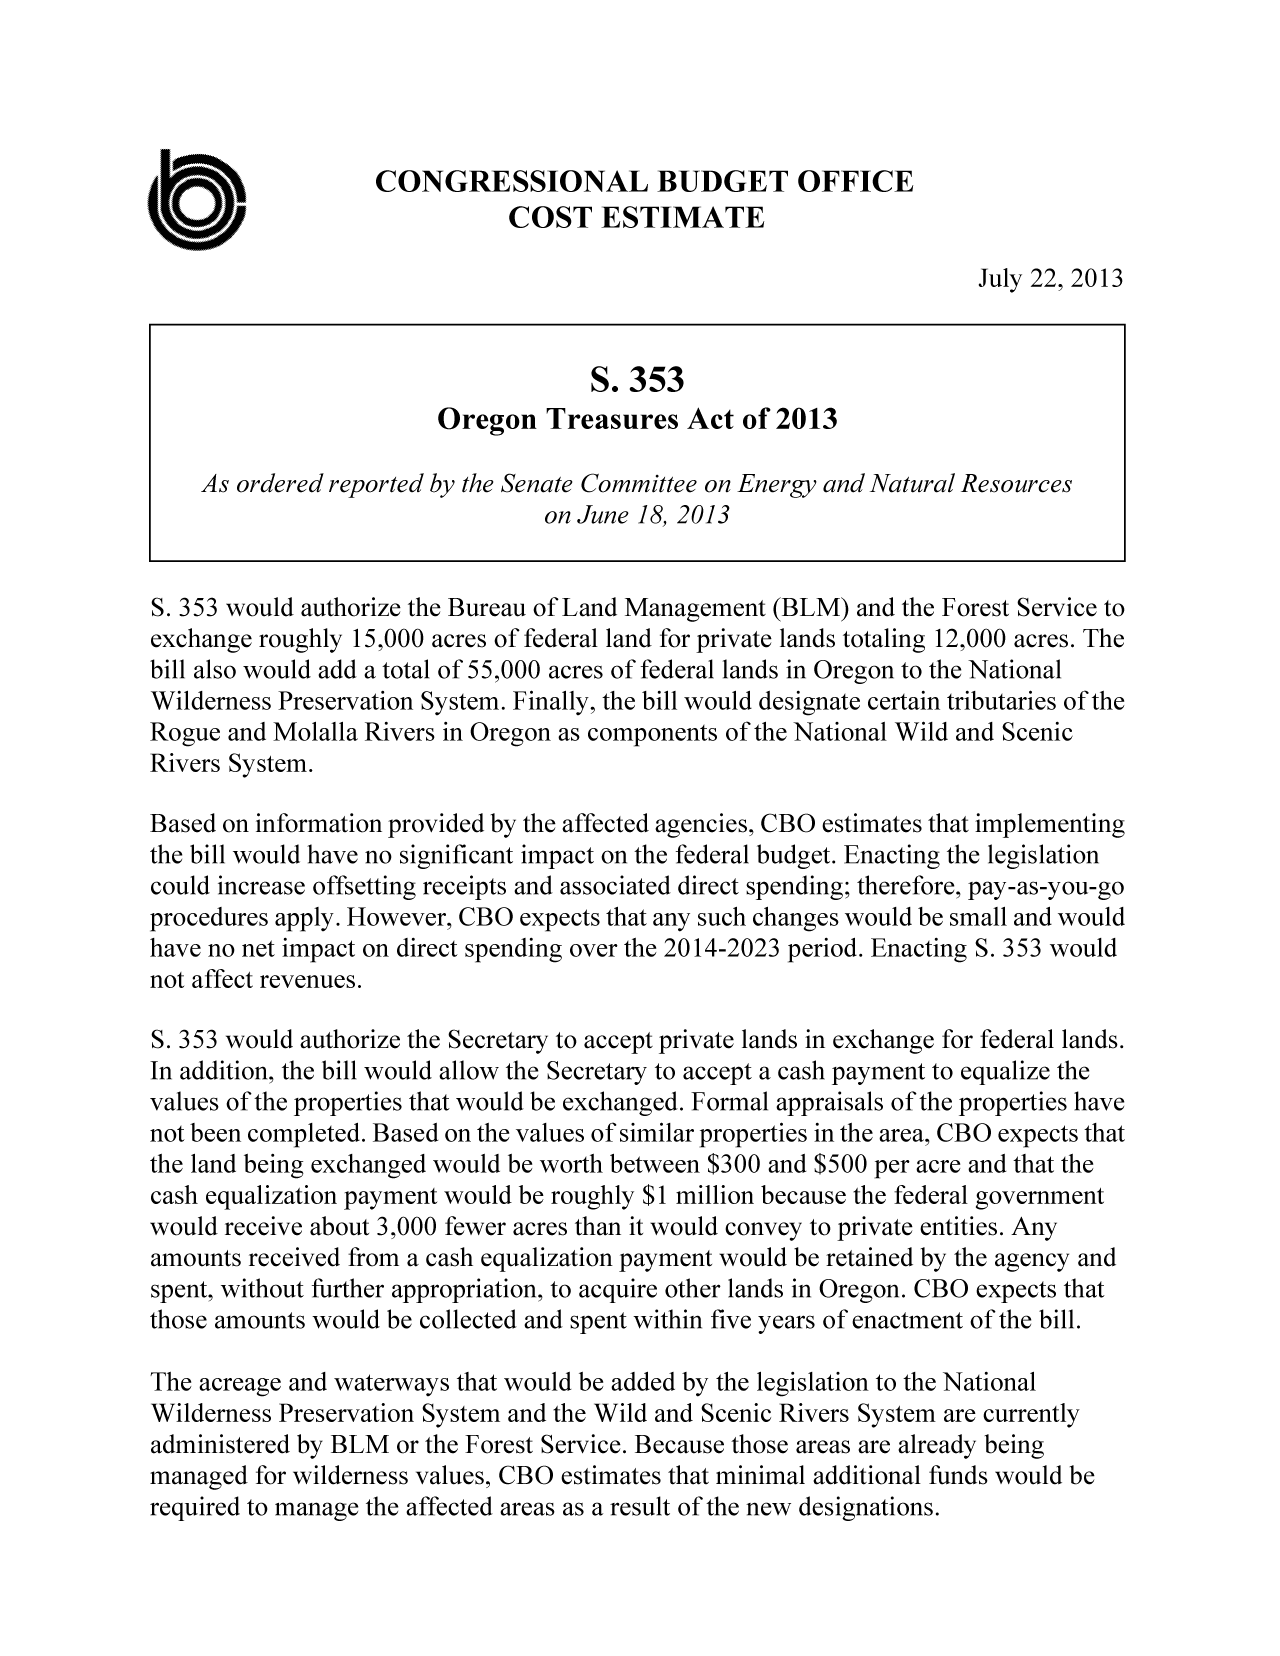 handle is hein.congrec/cbo11285 and id is 1 raw text is: CONGRESSIONAL BUDGET OFFICE
COST ESTIMATE
July 22, 2013
S. 353
Oregon Treasures Act of 2013
As ordered reported by the Senate Committee on Energy and Natural Resources
on June 18, 2013
S. 353 would authorize the Bureau of Land Management (BLM) and the Forest Service to
exchange roughly 15,000 acres of federal land for private lands totaling 12,000 acres. The
bill also would add a total of 55,000 acres of federal lands in Oregon to the National
Wilderness Preservation System. Finally, the bill would designate certain tributaries of the
Rogue and Molalla Rivers in Oregon as components of the National Wild and Scenic
Rivers System.
Based on information provided by the affected agencies, CBO estimates that implementing
the bill would have no significant impact on the federal budget. Enacting the legislation
could increase offsetting receipts and associated direct spending; therefore, pay-as-you-go
procedures apply. However, CBO expects that any such changes would be small and would
have no net impact on direct spending over the 2014-2023 period. Enacting S. 353 would
not affect revenues.
S. 353 would authorize the Secretary to accept private lands in exchange for federal lands.
In addition, the bill would allow the Secretary to accept a cash payment to equalize the
values of the properties that would be exchanged. Formal appraisals of the properties have
not been completed. Based on the values of similar properties in the area, CBO expects that
the land being exchanged would be worth between $300 and $500 per acre and that the
cash equalization payment would be roughly $1 million because the federal government
would receive about 3,000 fewer acres than it would convey to private entities. Any
amounts received from a cash equalization payment would be retained by the agency and
spent, without further appropriation, to acquire other lands in Oregon. CBU expects that
those amounts would be collected and spent within five years of enactment of the bill.
The acreage and waterways that would be added by the legislation to the National
Wilderness Preservation System and the Wild and Scenic Rivers System are currently
administered by BLM or the Forest Service. Because those areas are already being
managed for wilderness values, CBO estimates that minimal additional funds would be
required to manage the affected areas as a result of the new designations.


